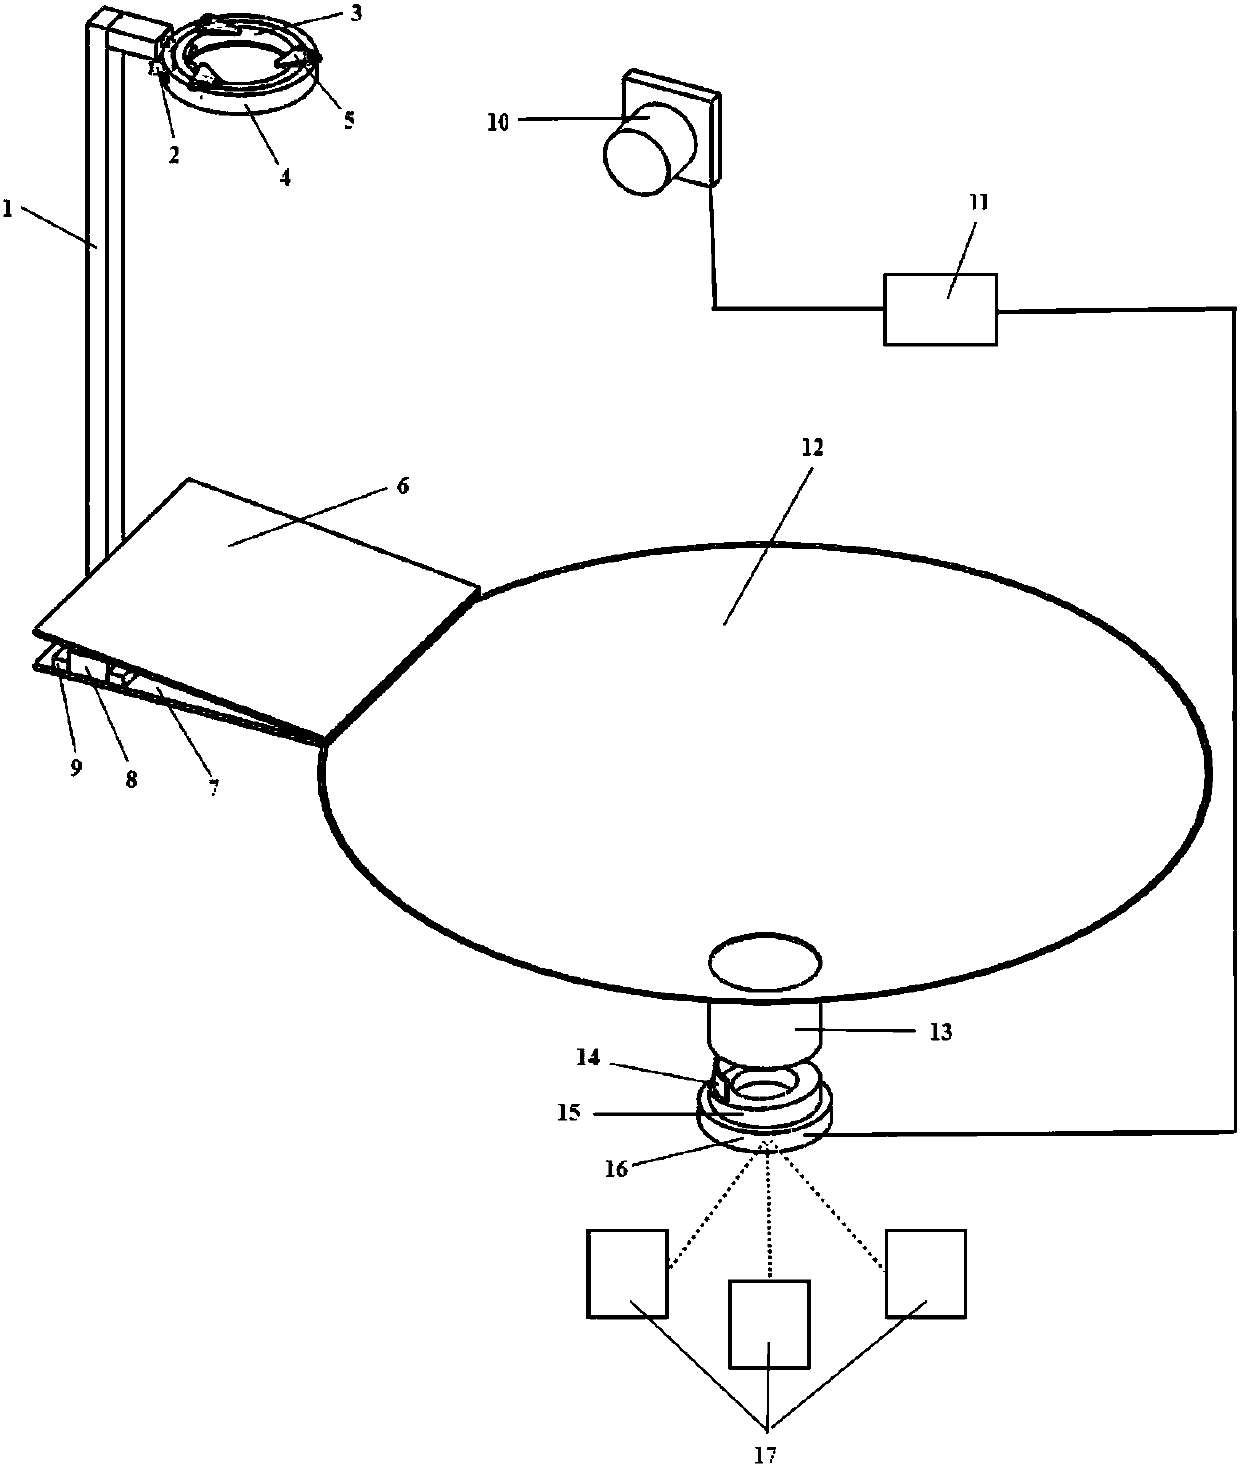 Bounce property detection device for table tennis ball